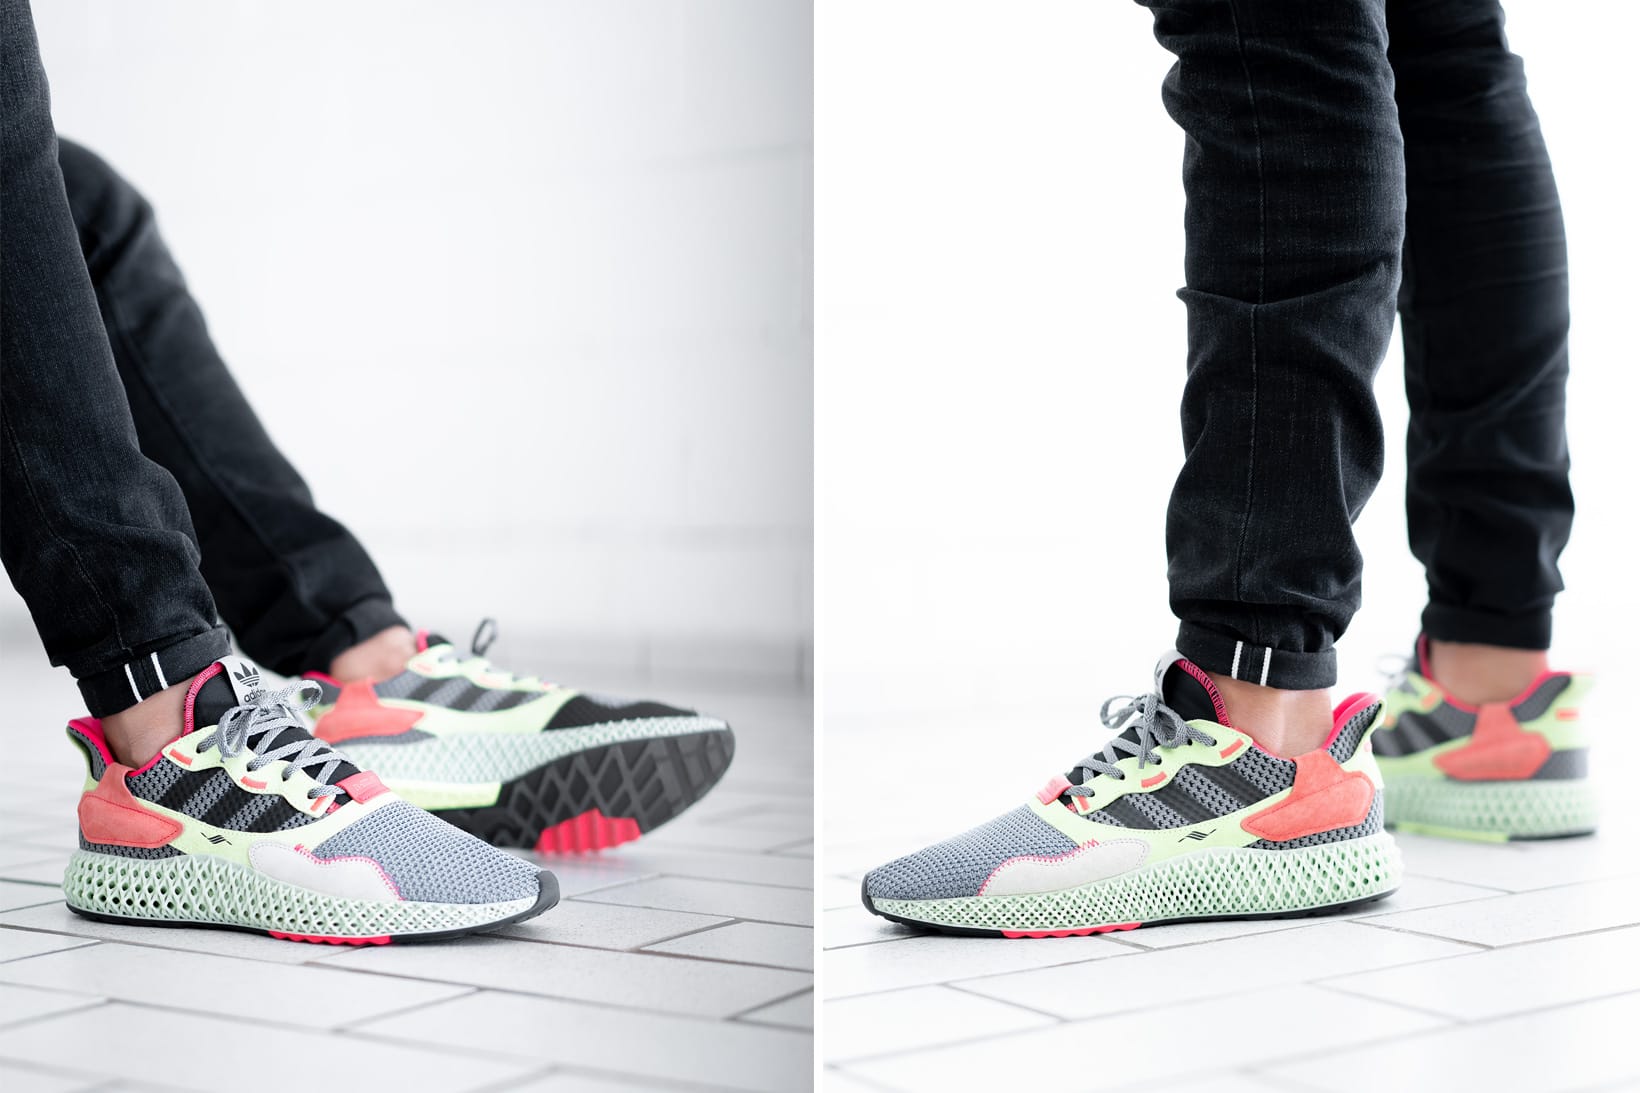 adidas ZX 4000 4D in New Colorway First 